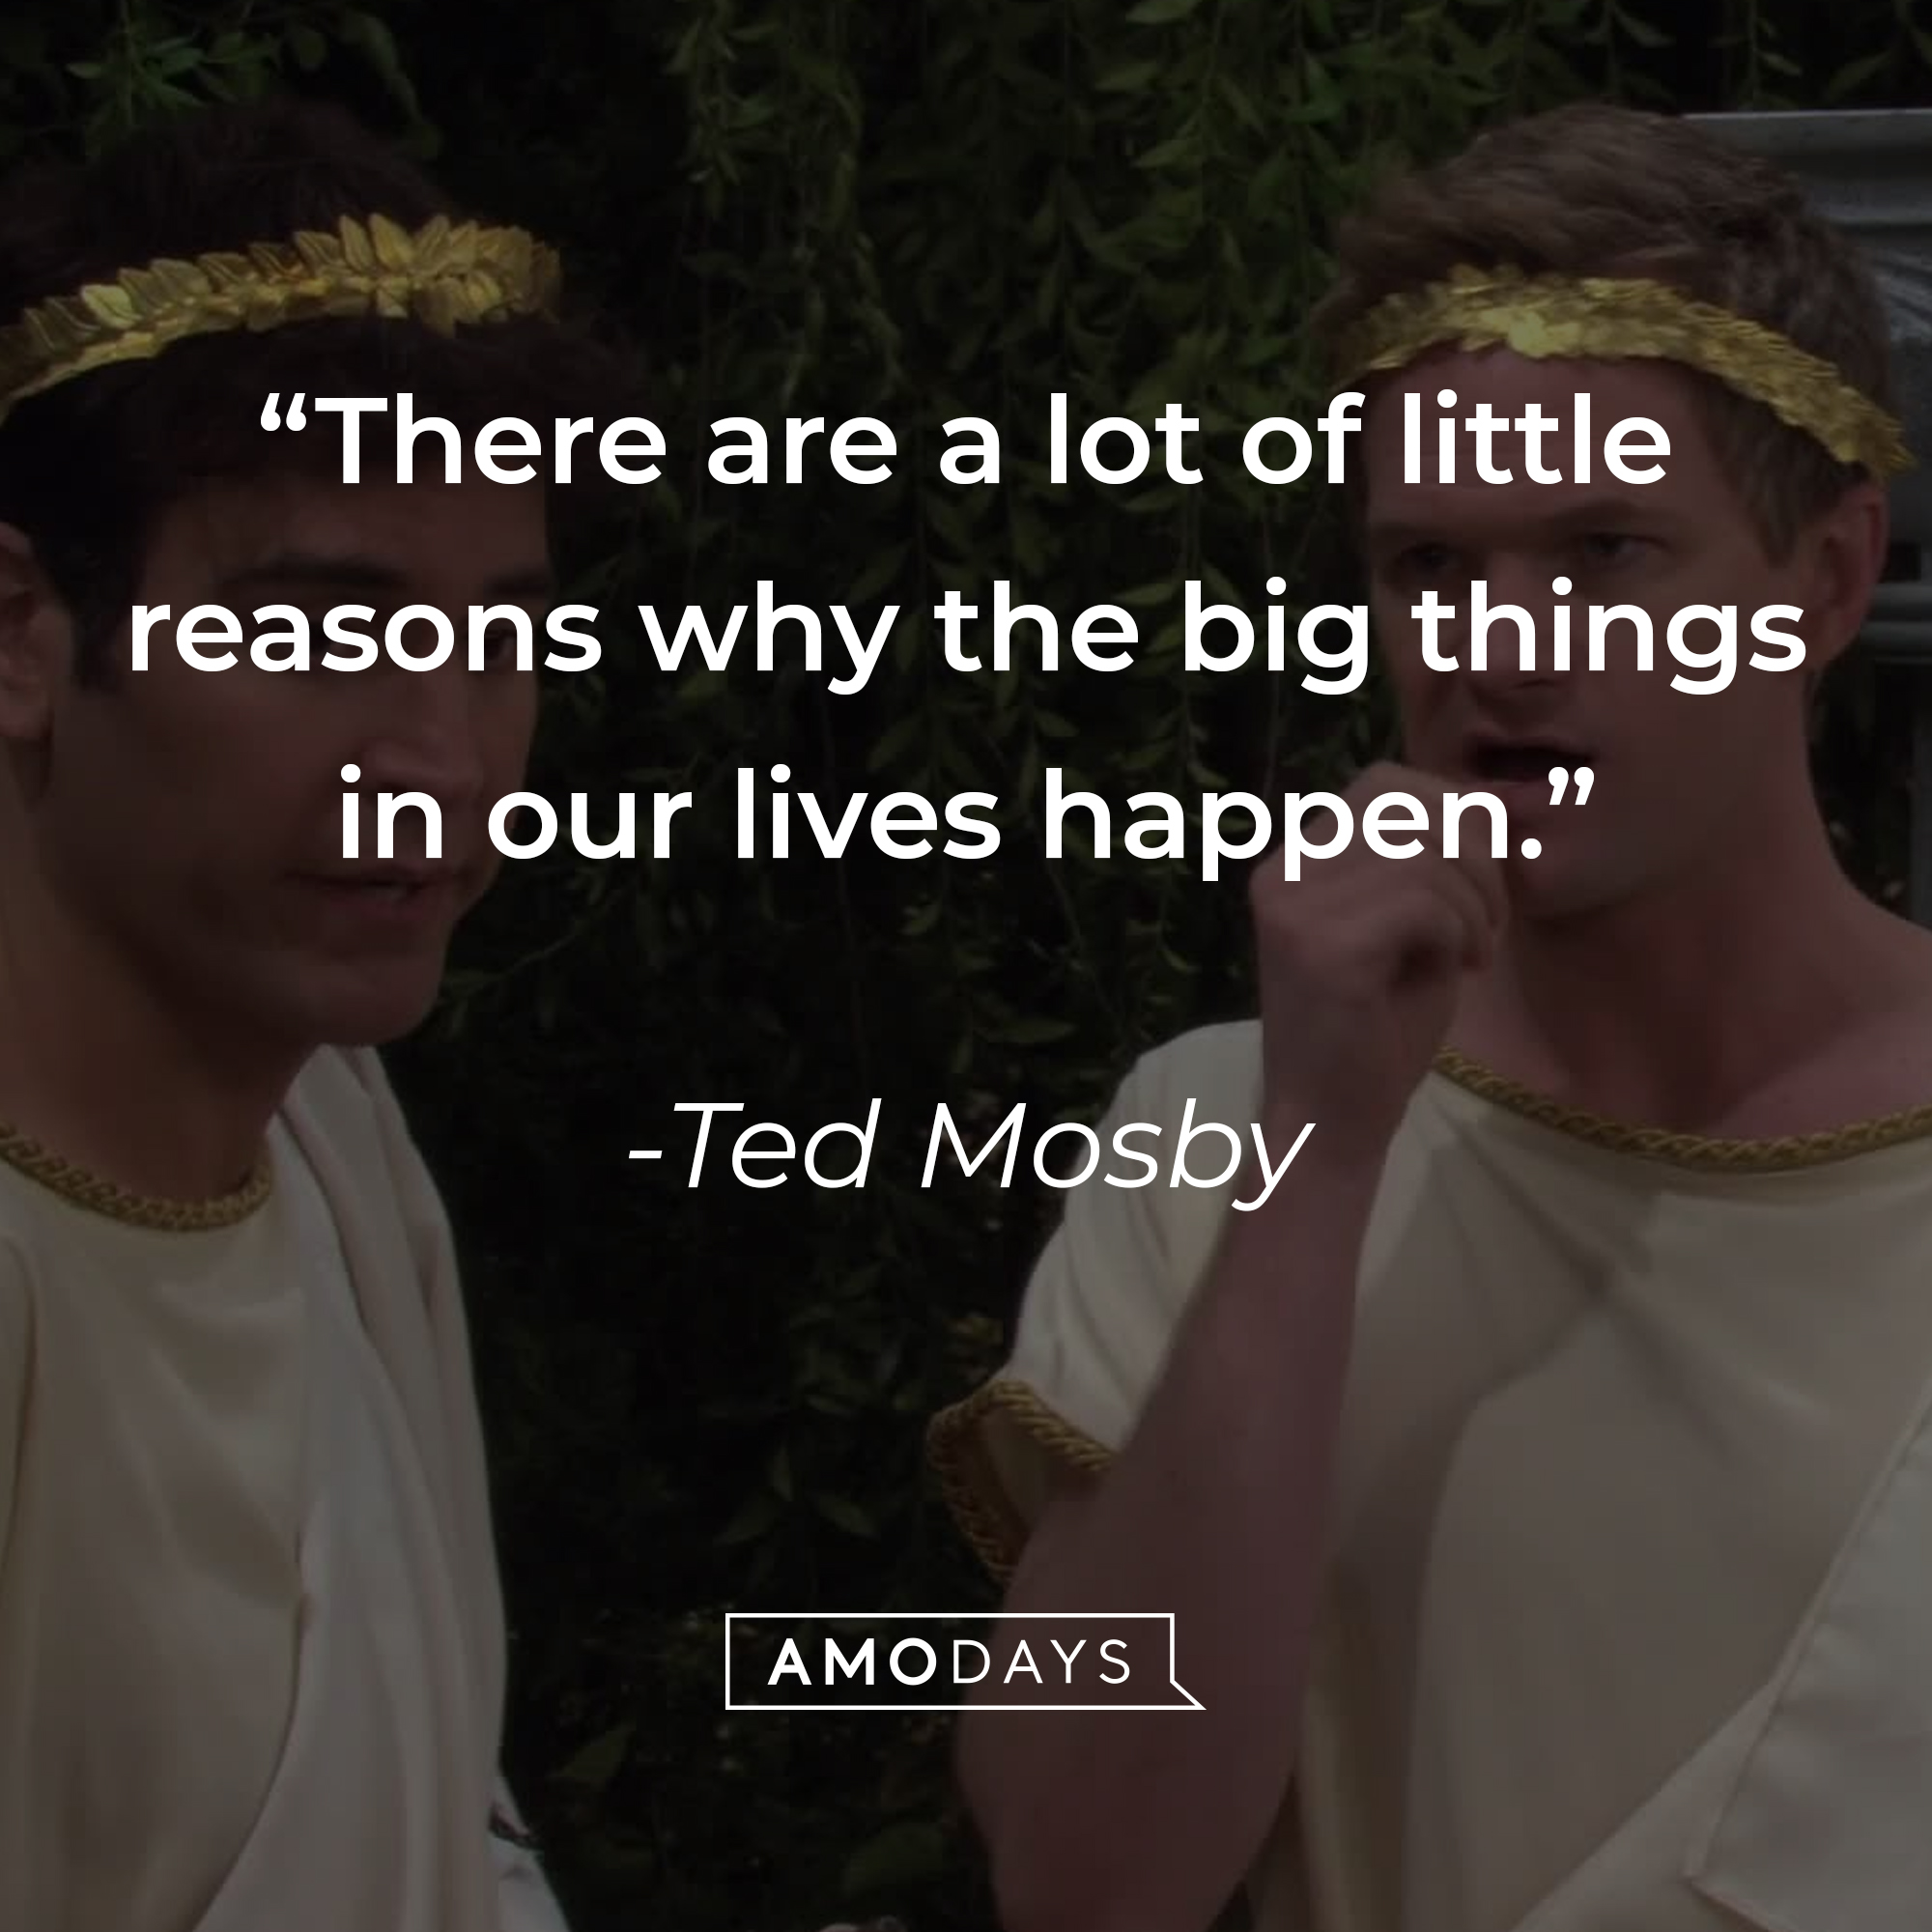 Ted Mosby's quote: “There are a lot of little reasons why the big things in our lives happen.” | Source: facebook.com/OfficialHowIMetYourMother